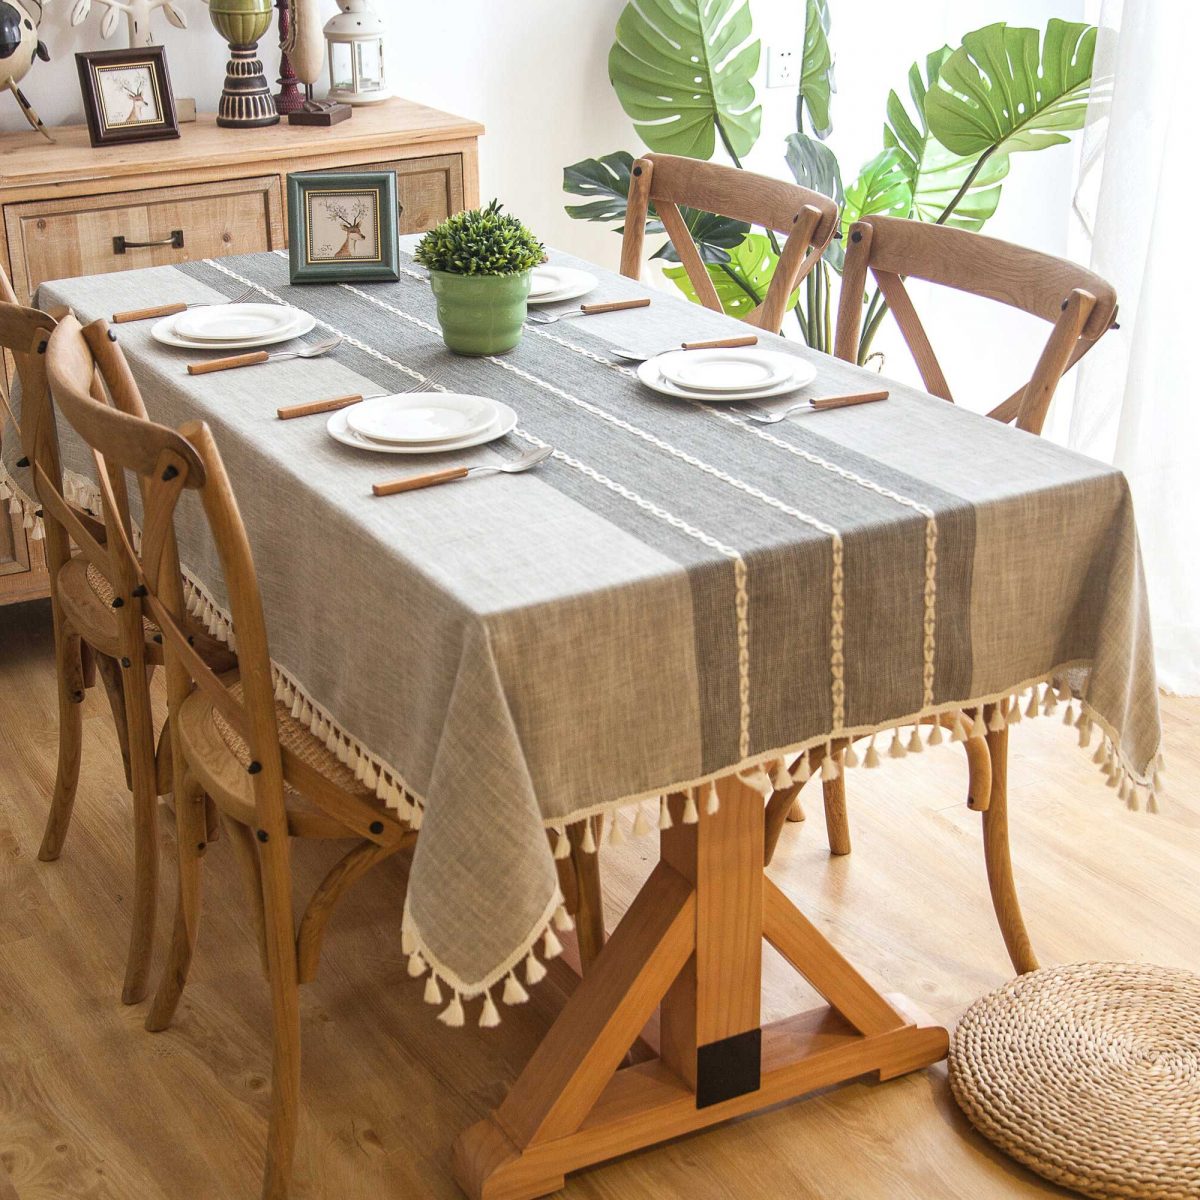 Elegant Table Décor Ideas With Oval Hemstitch Tablecloth To Beautify Your Dining | Table Covers Depot